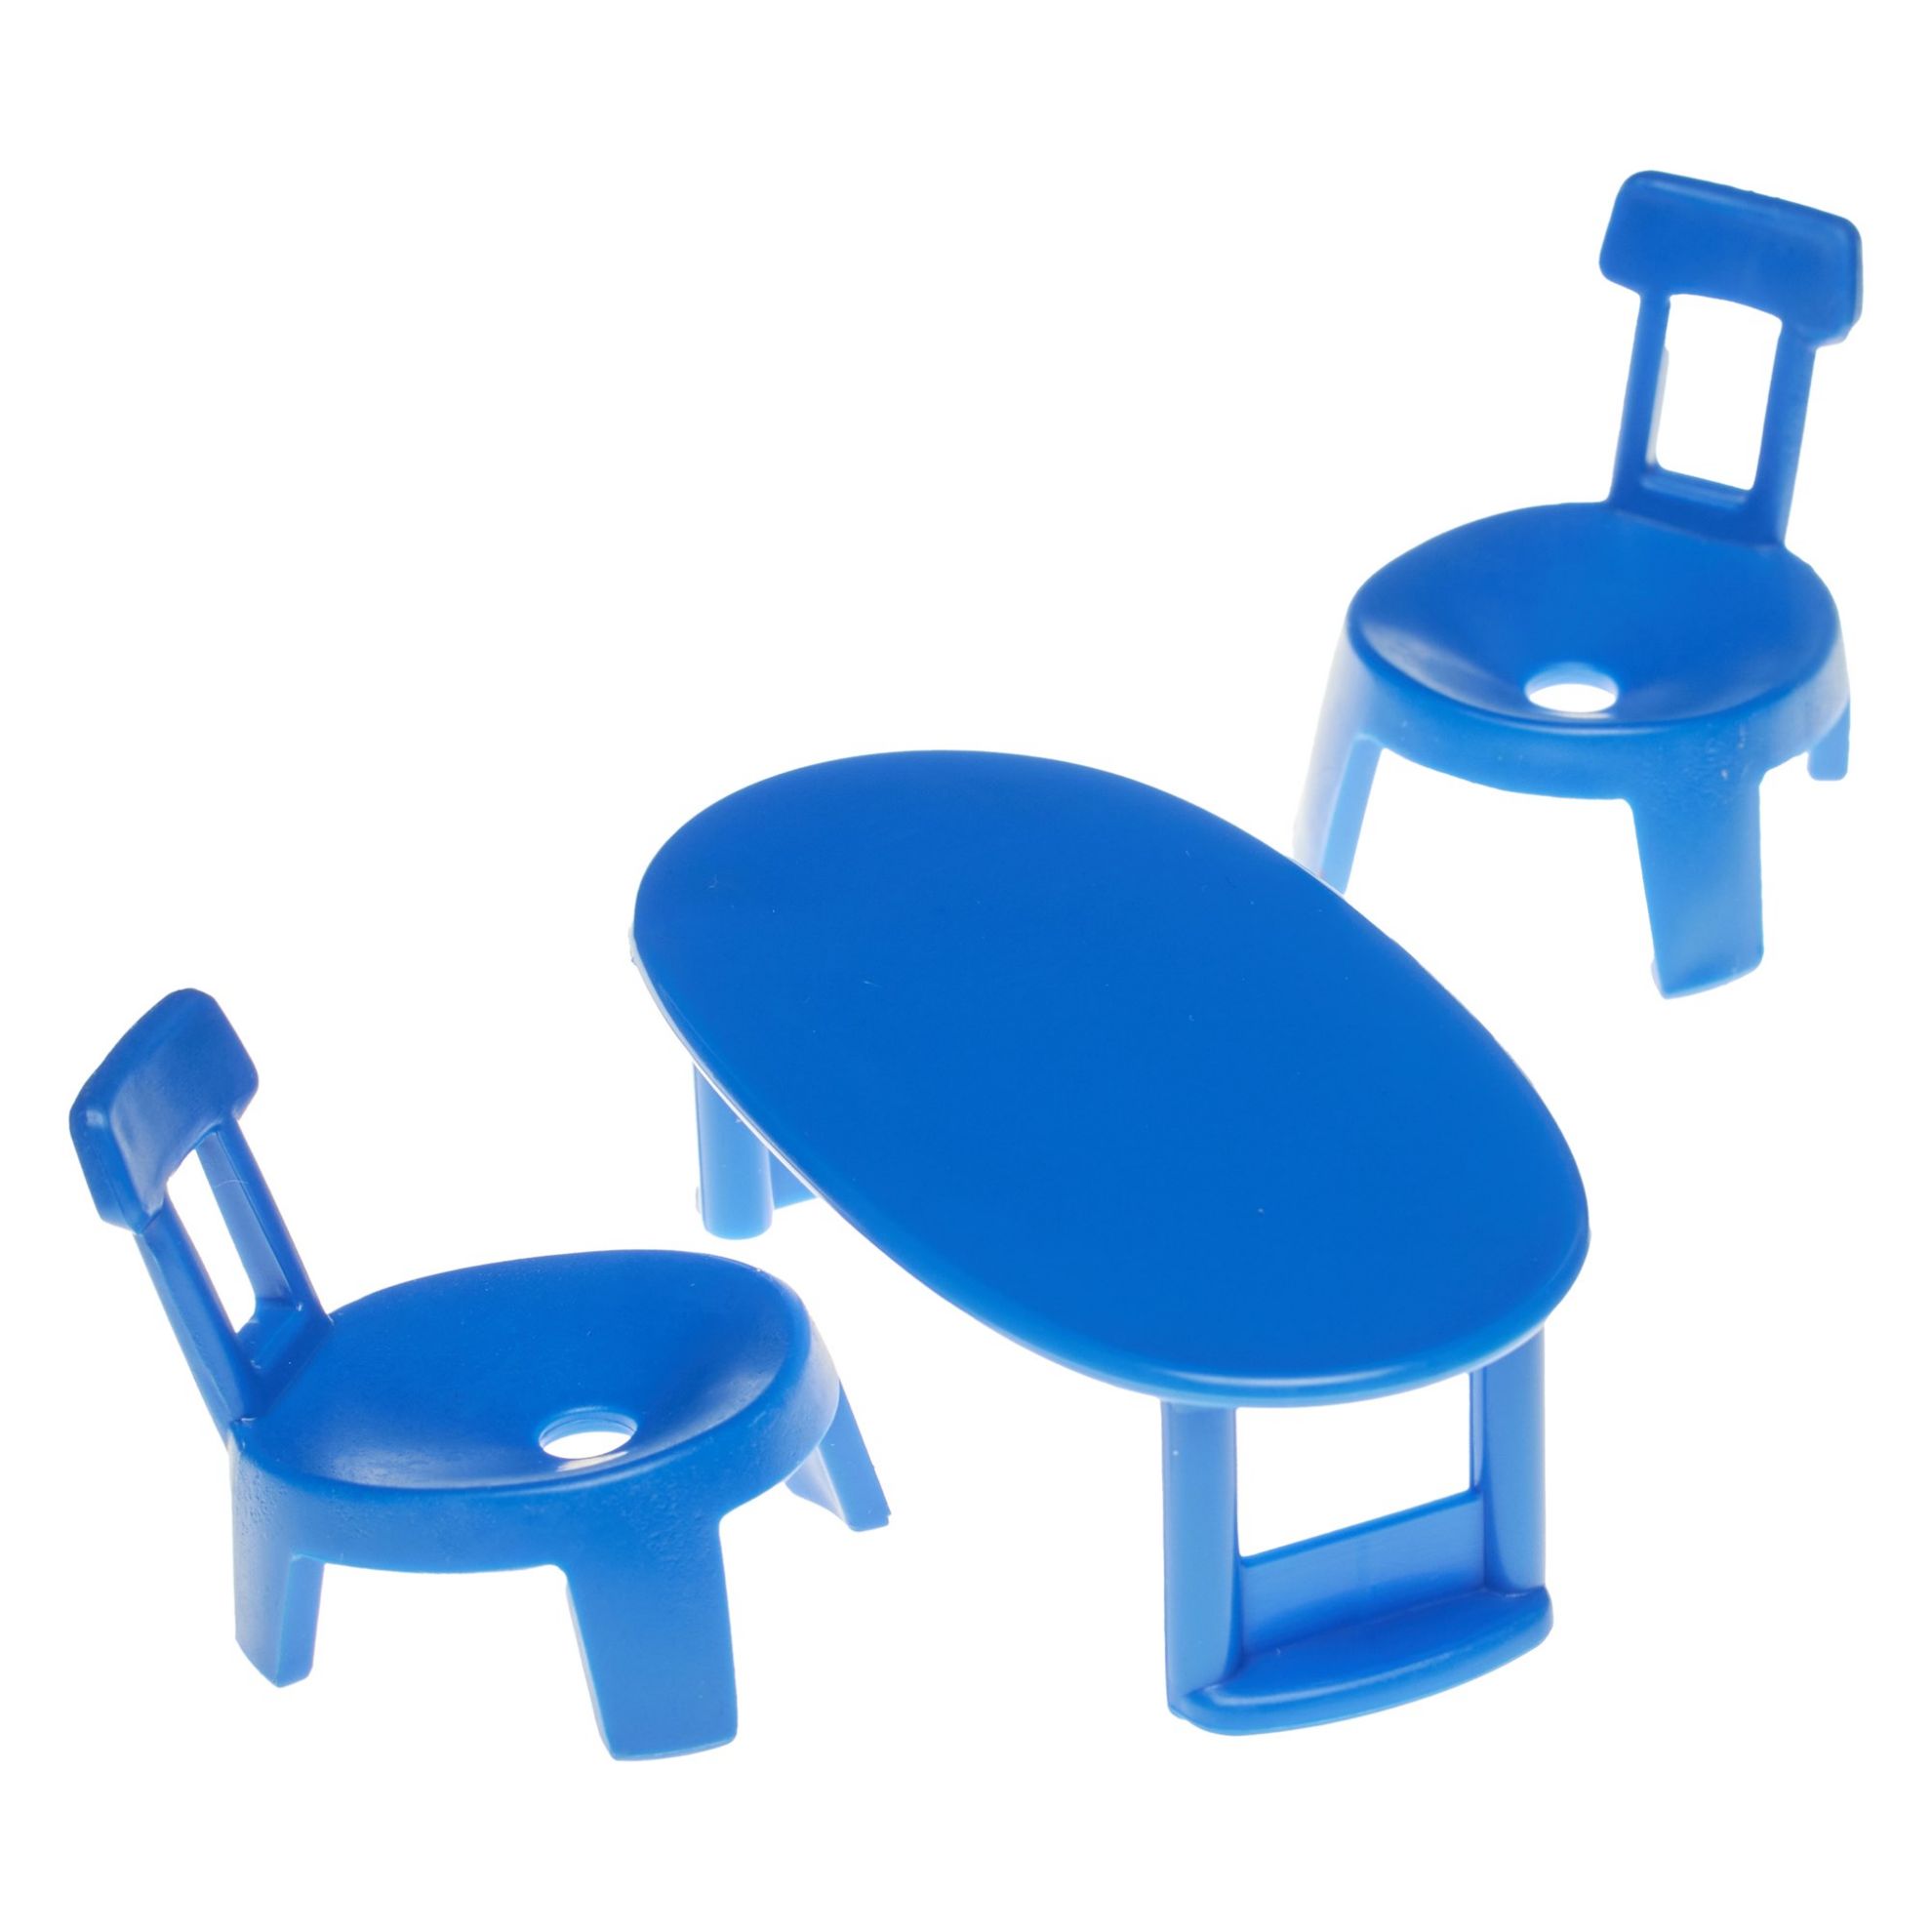 Spare Parts - Peppa Pig Wooden Playhouse - Blue Dining Table & 2 Chairs